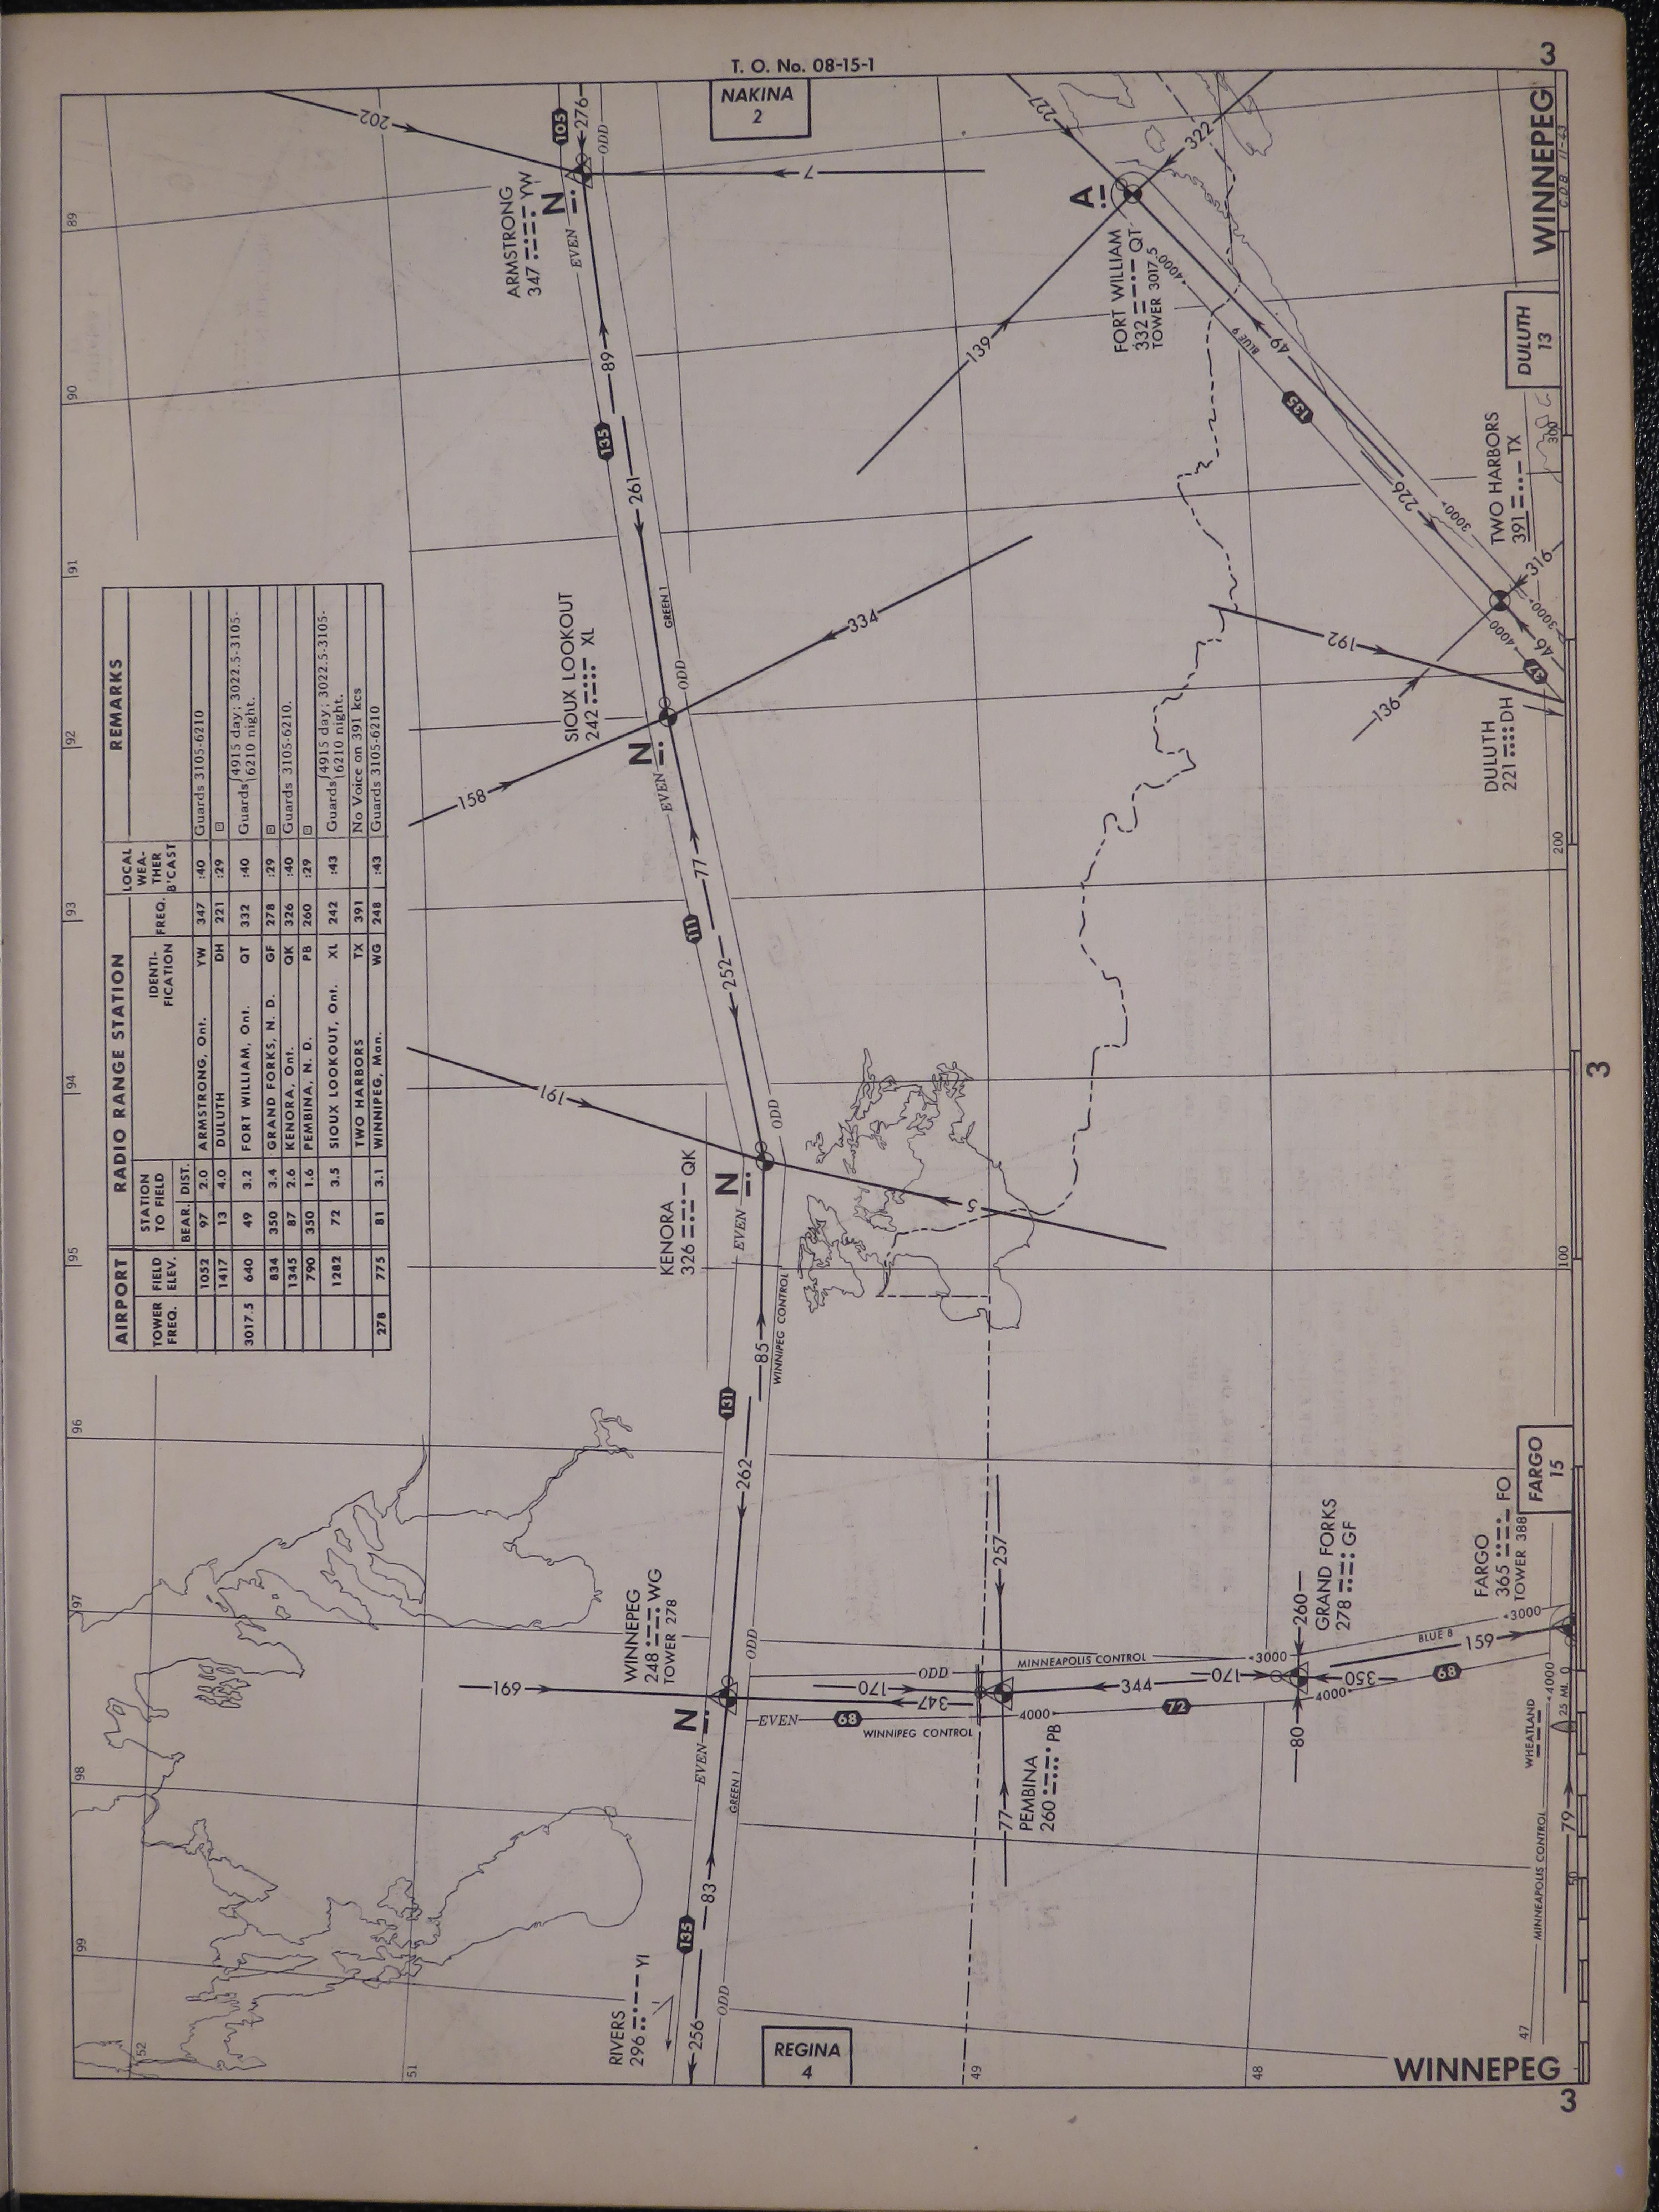 Sample page 7 from AirCorps Library document: Army Air Forces Radio Facility Charts